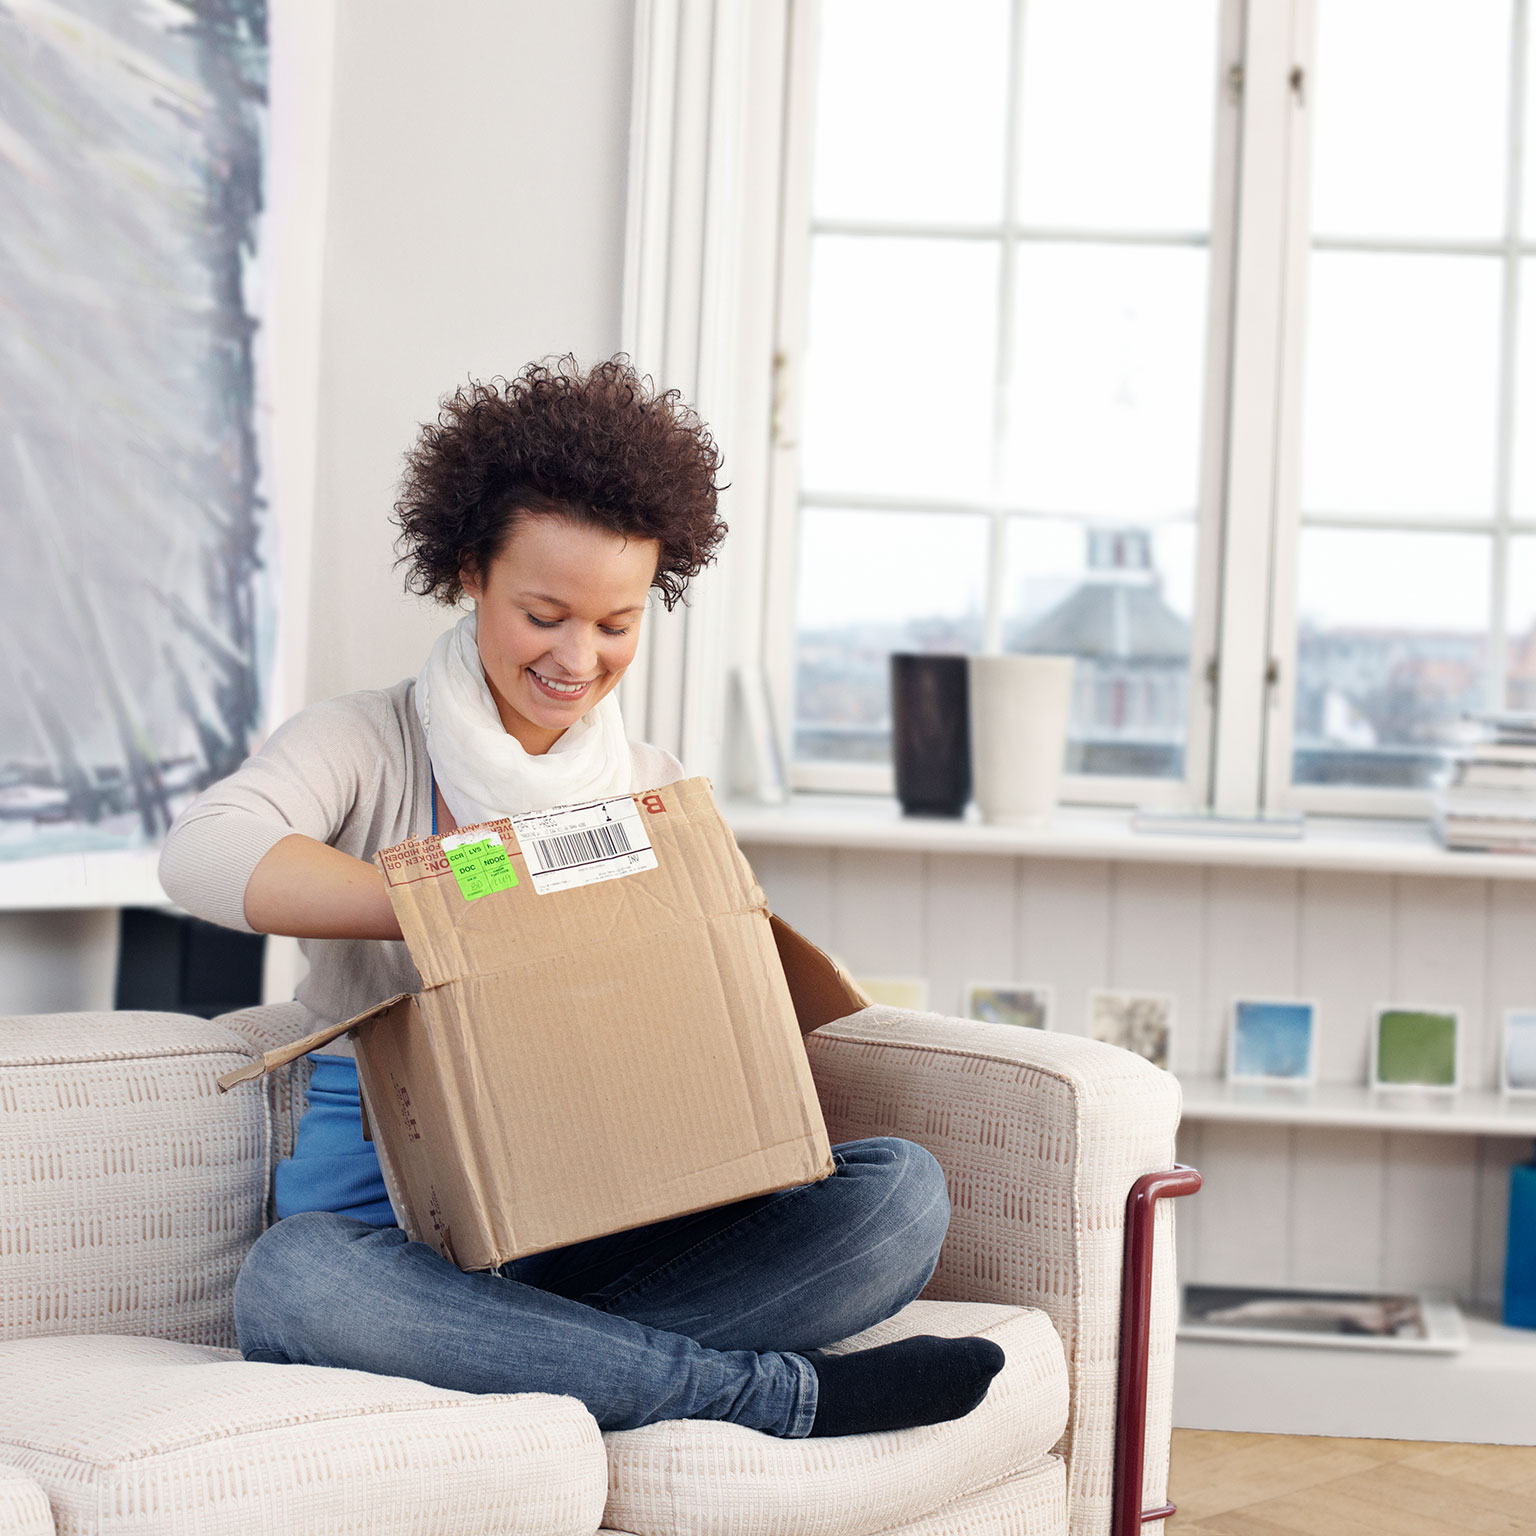 Thinking inside the subscription box: New research on e-commerce consumers